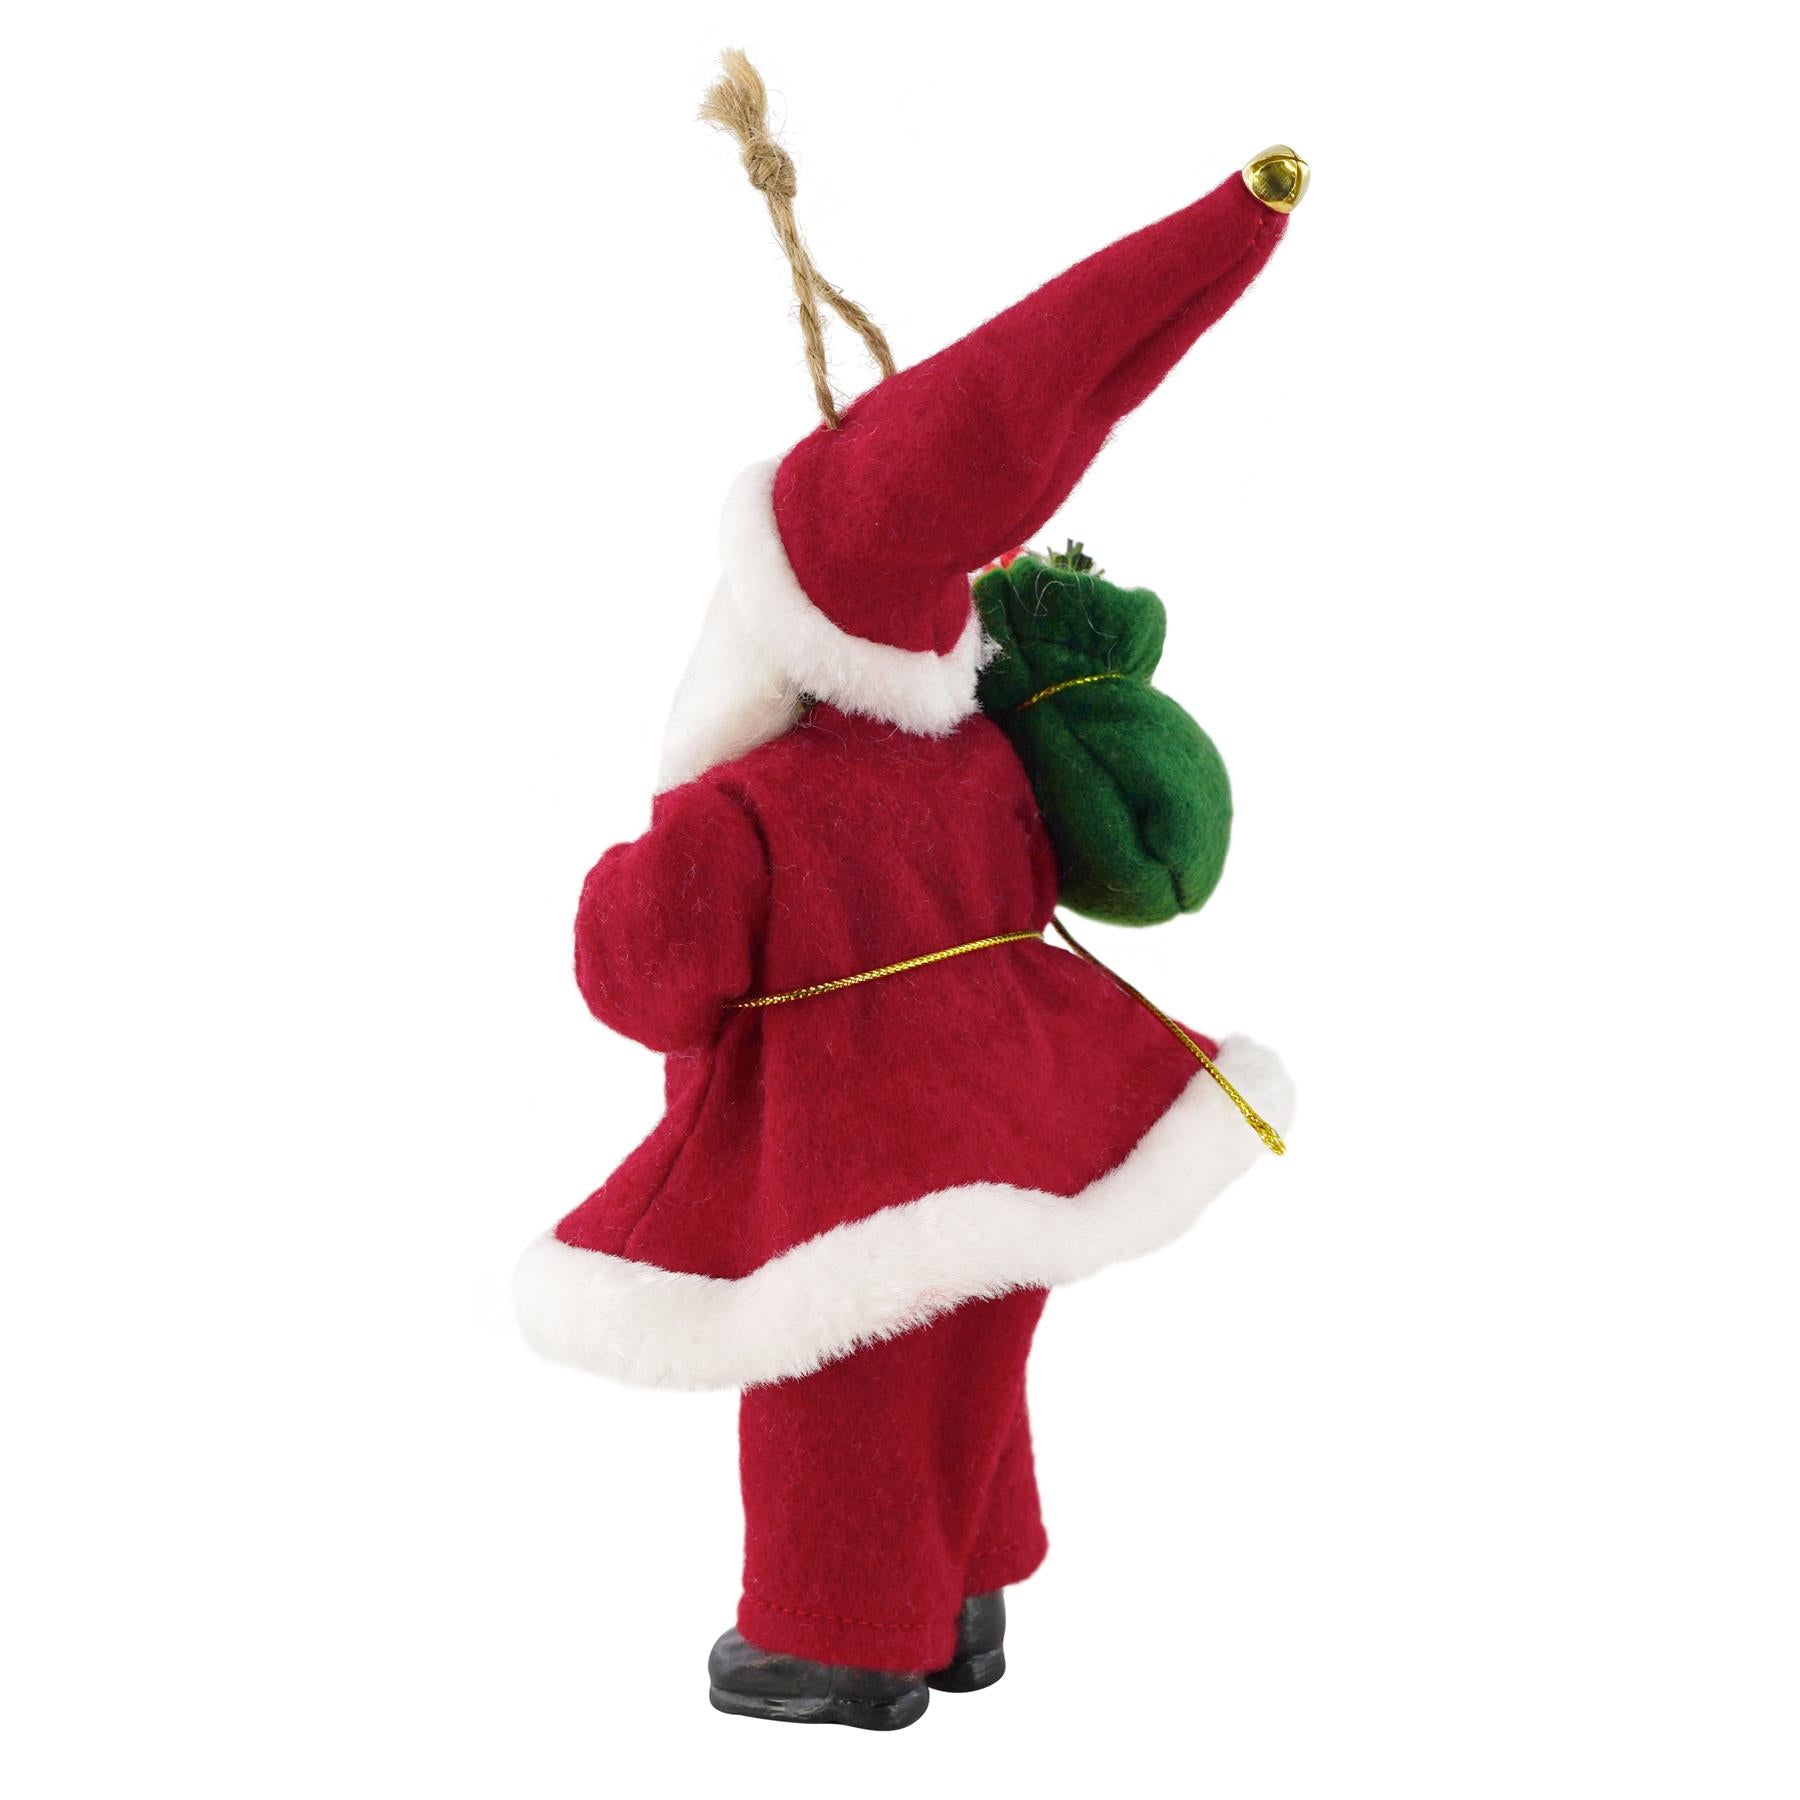 The Magic Toy Shop Christmas Decoration Standing Small Santa Claus